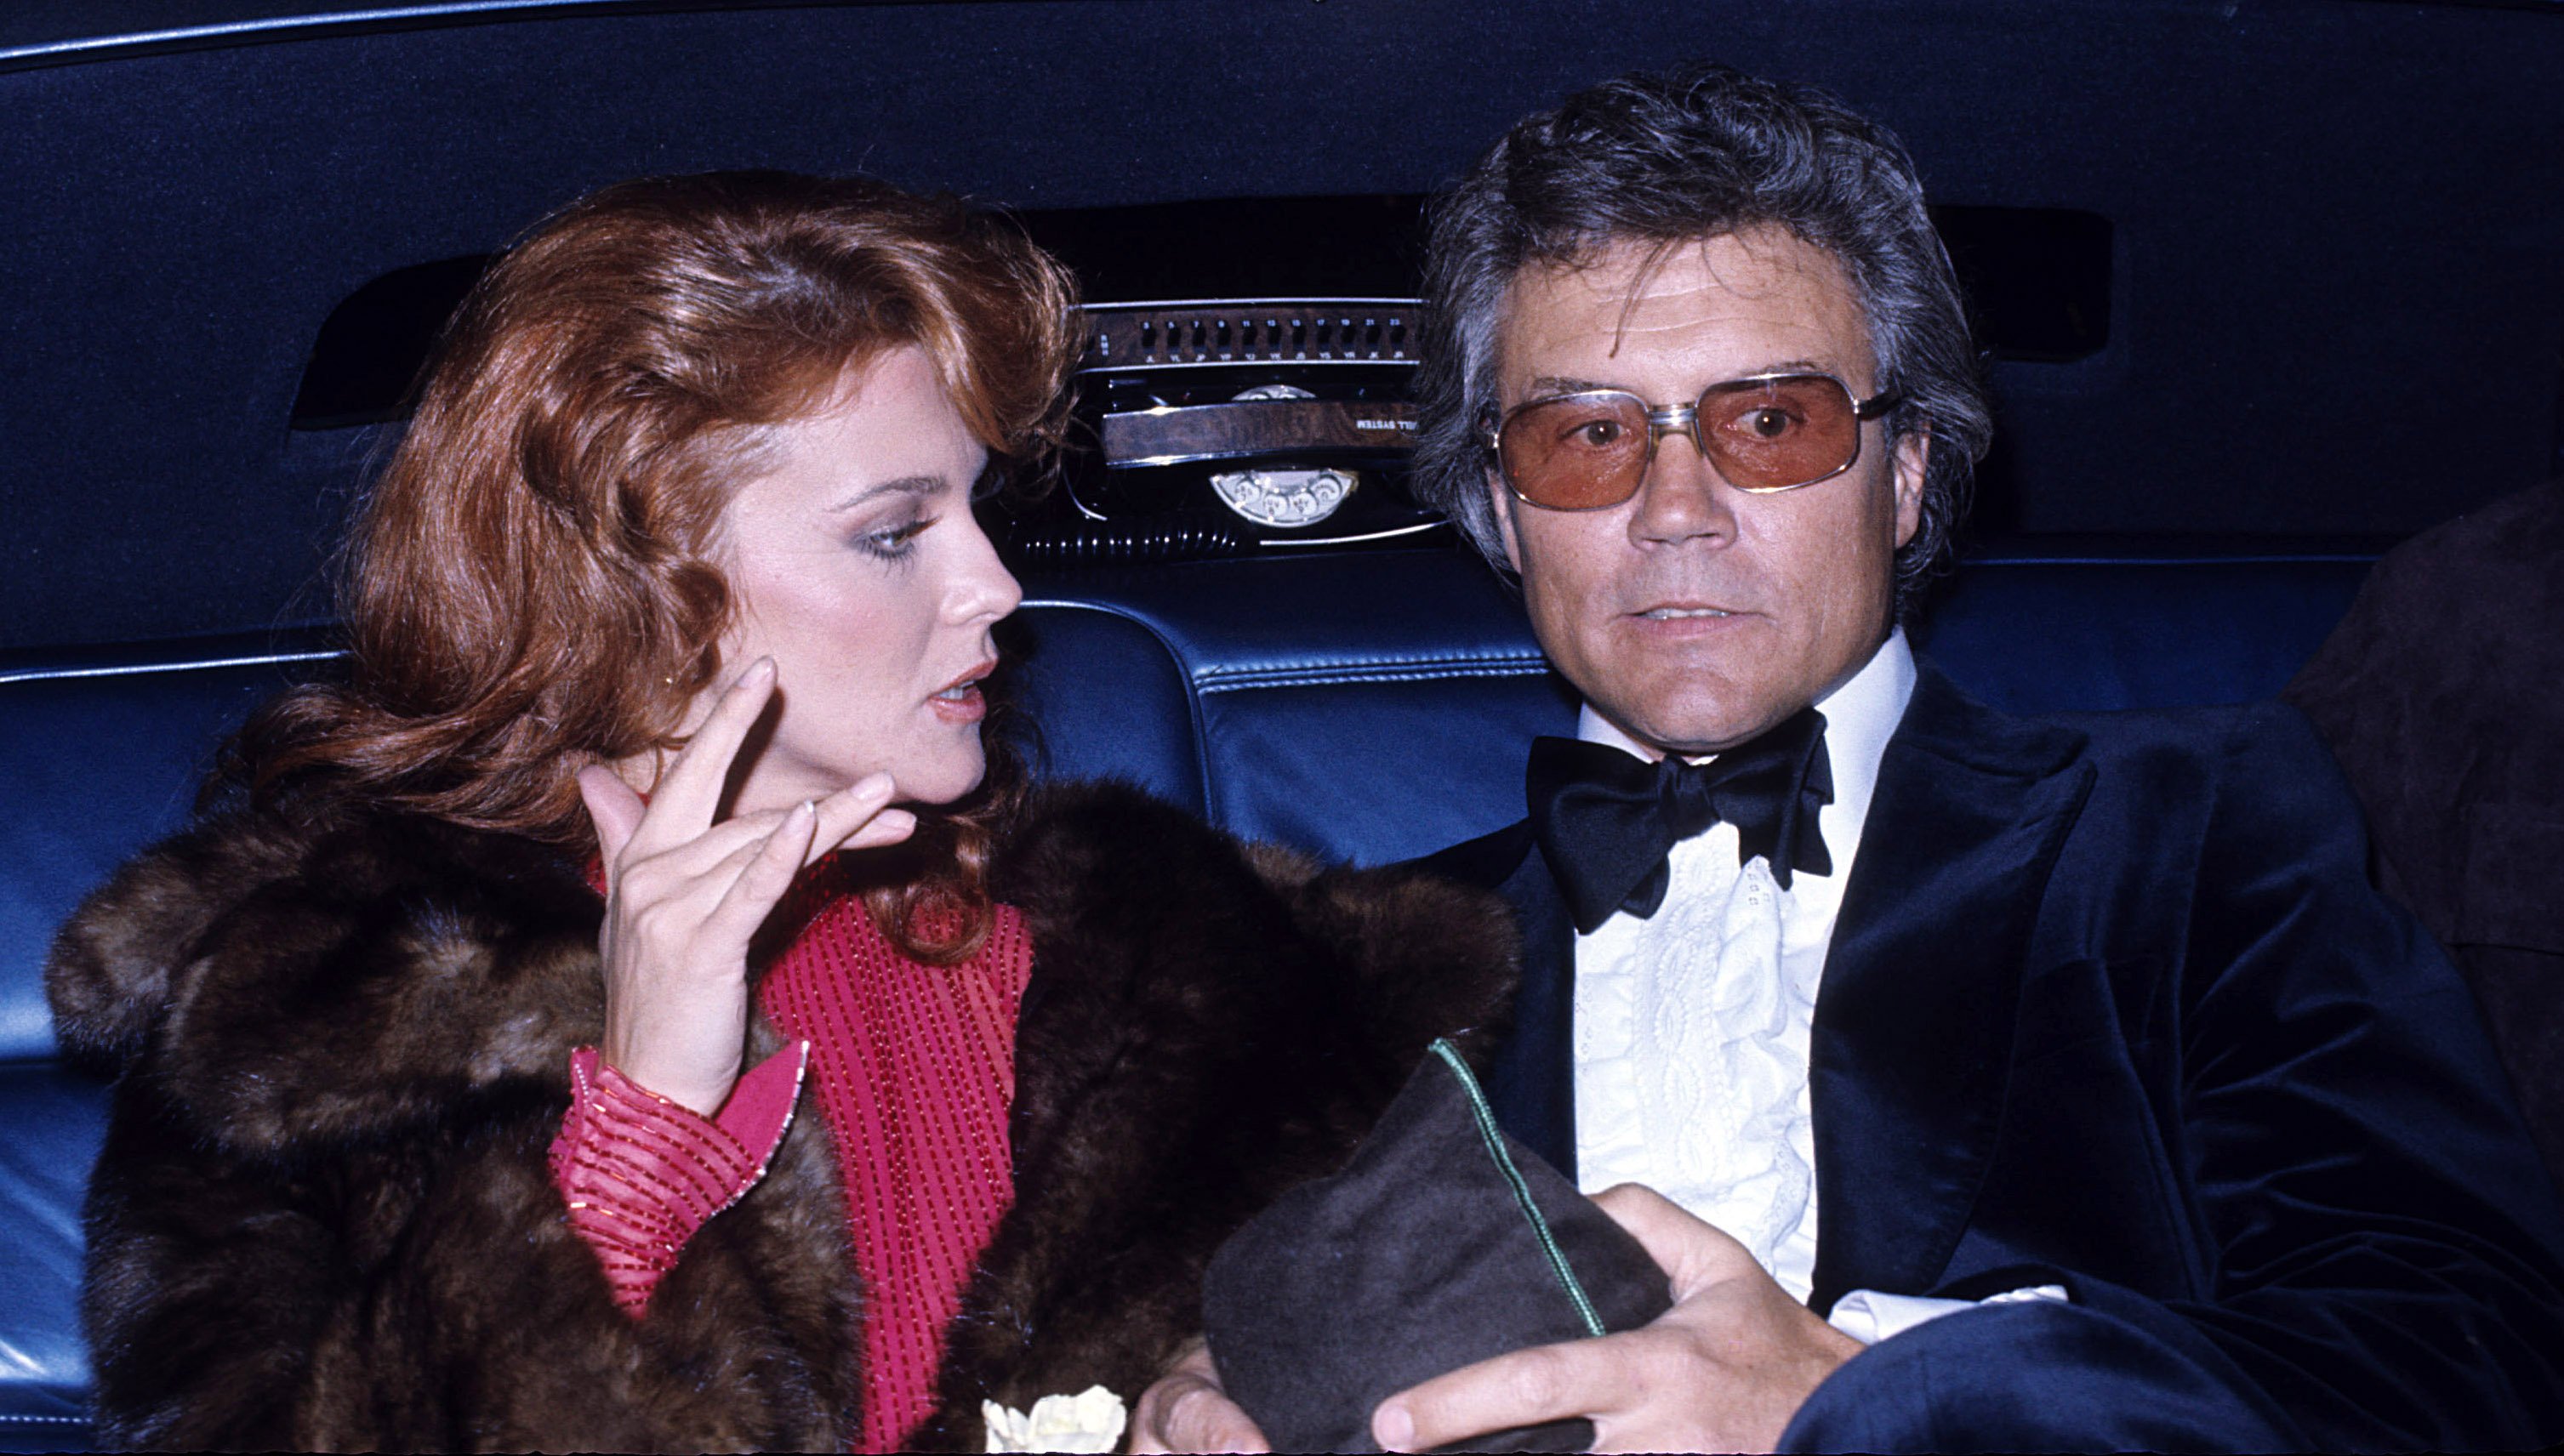 Ann-Margret and Roger Smith during a sighting at The Waldorf Astoria Hotel in 1972 in New York. | Source: Getty Images